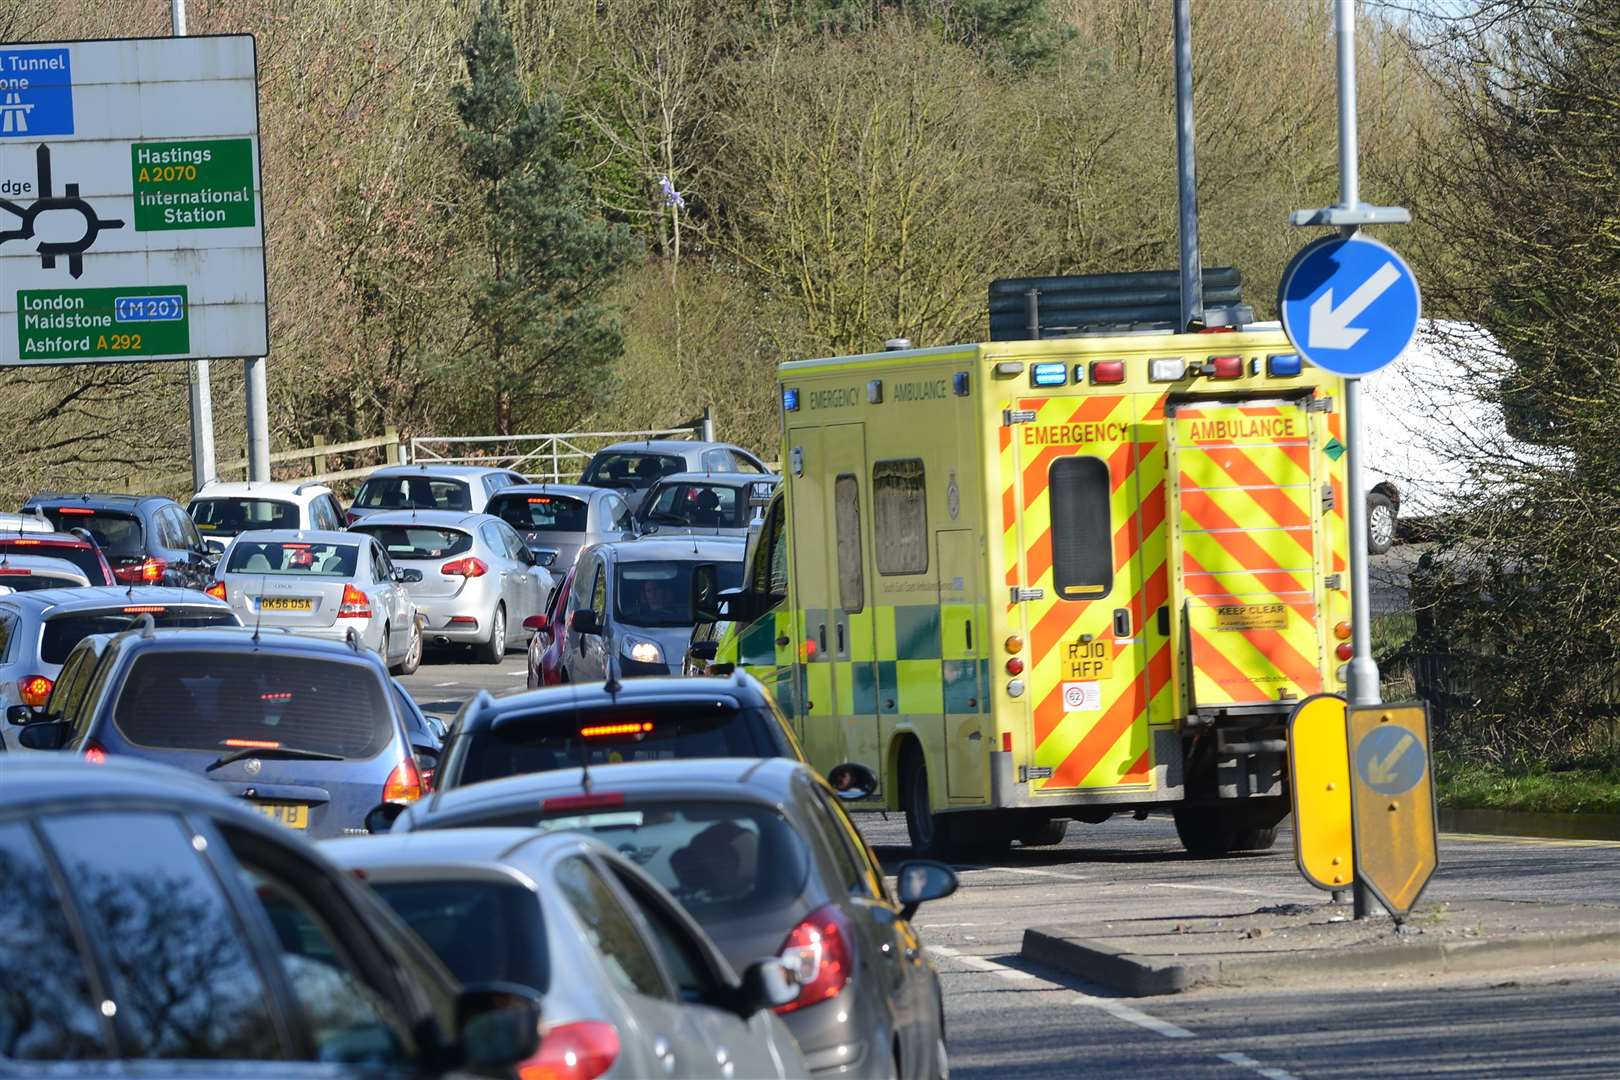 An ambulance trying to make it through to Junction 10 in 2016; Cllr Paul Bartlett thinks the removal of some traffic lights has helped traffic flow